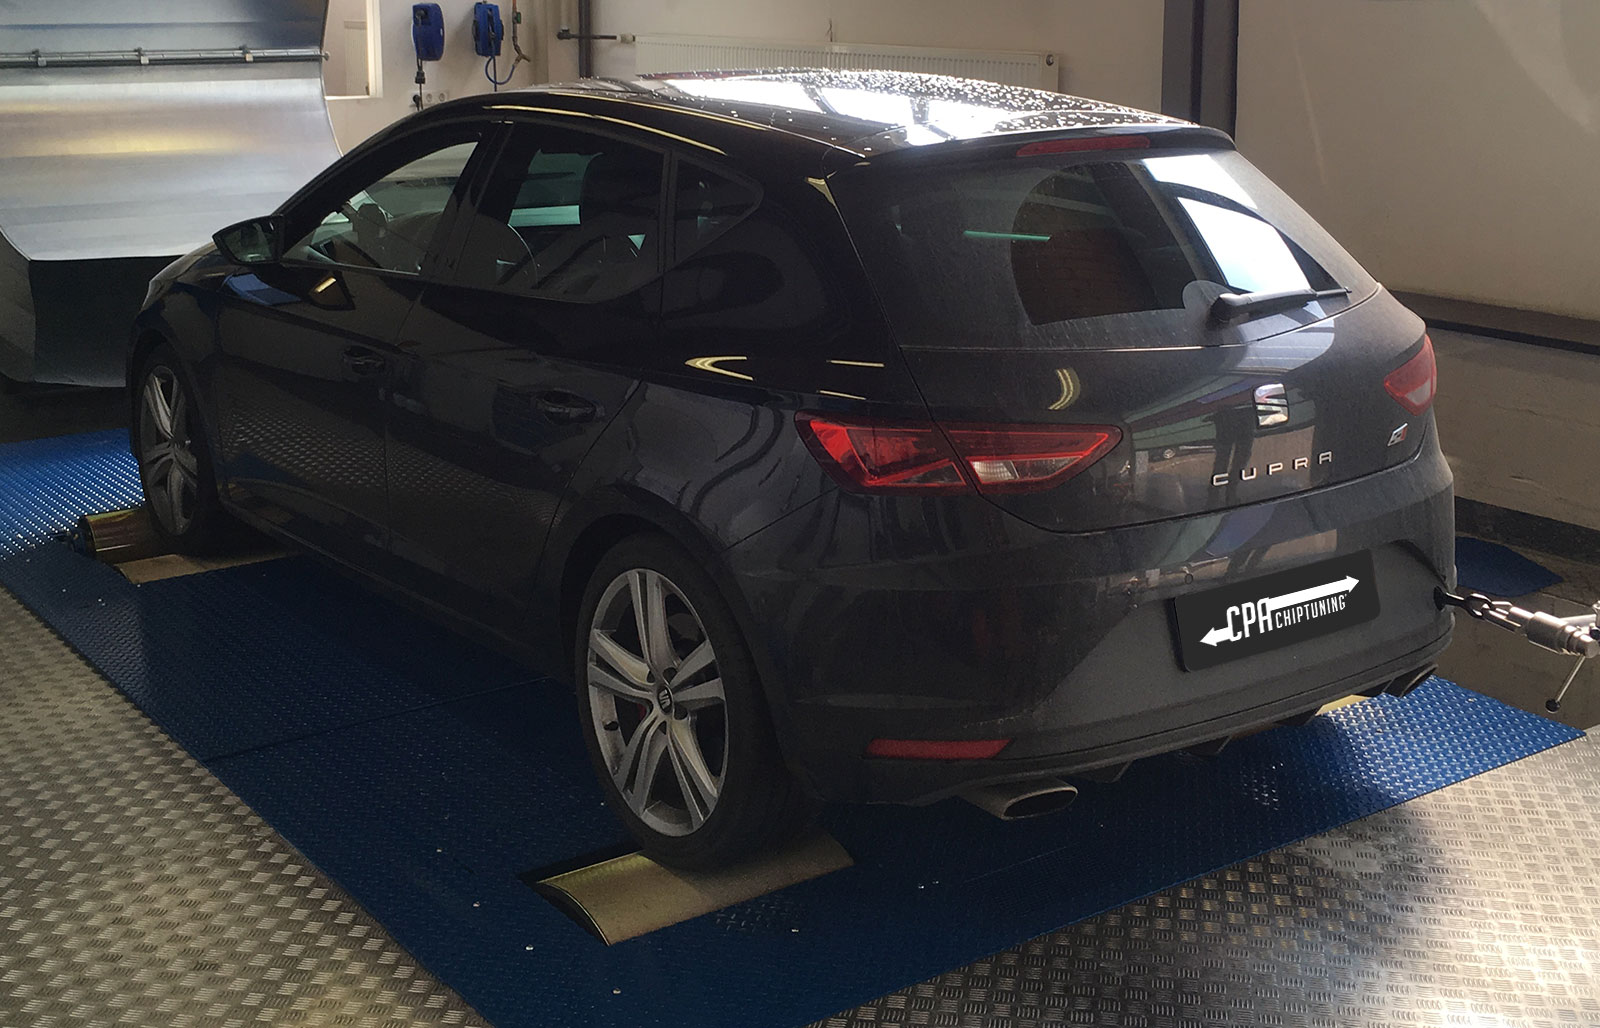 CPA PowerBox: Over 300 HP in the Seat Leon Cupra